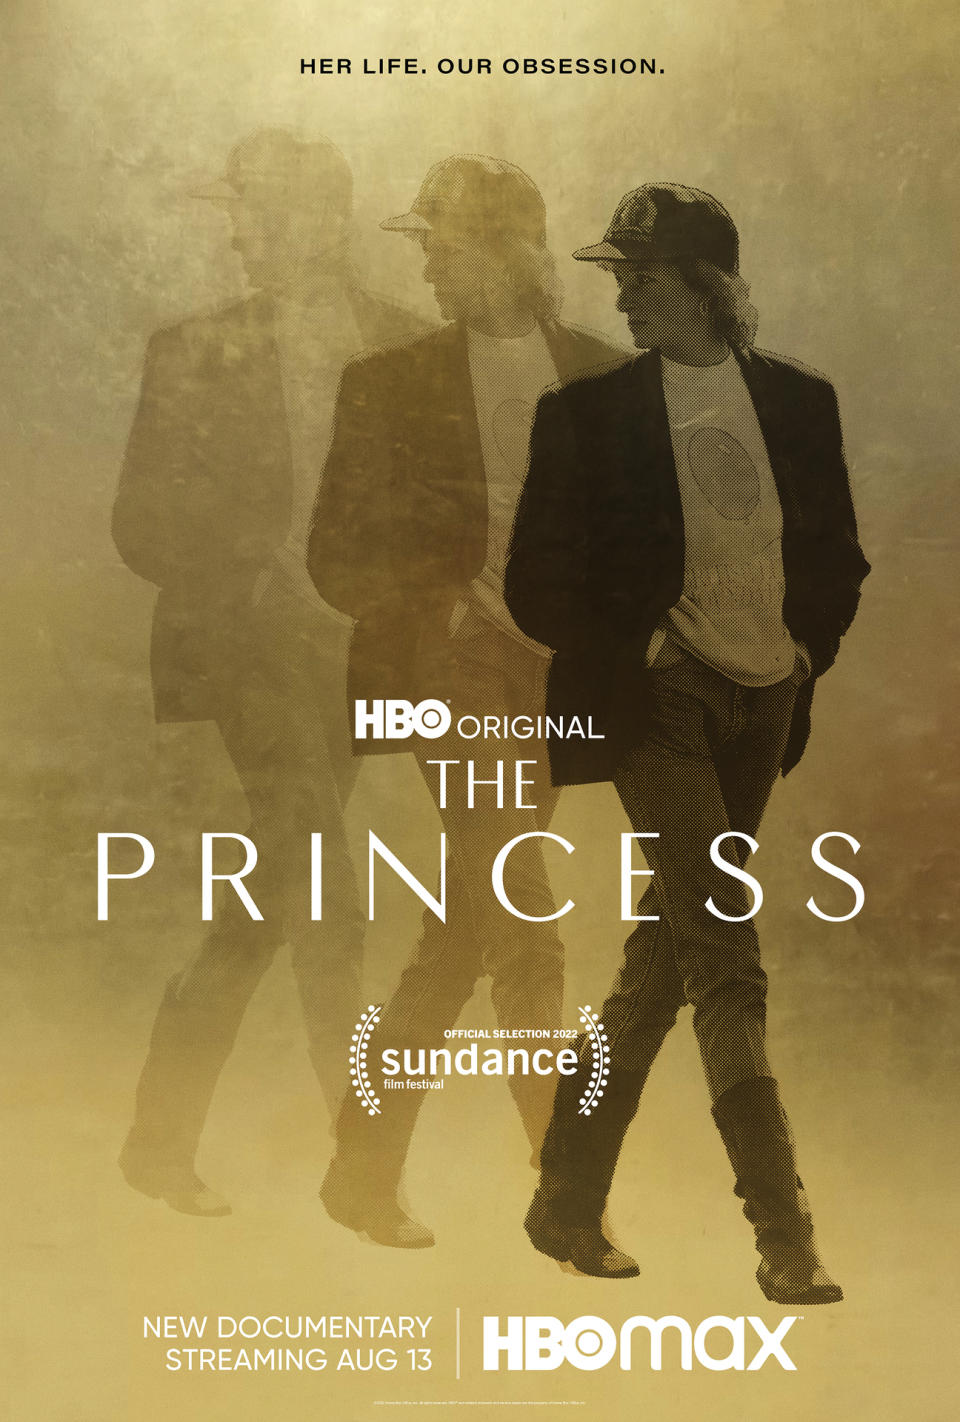 This image released by HBO Max shows promotional art for the film "The Princess," a documentary premiering on Aug. 13. (HBO Max via AP)